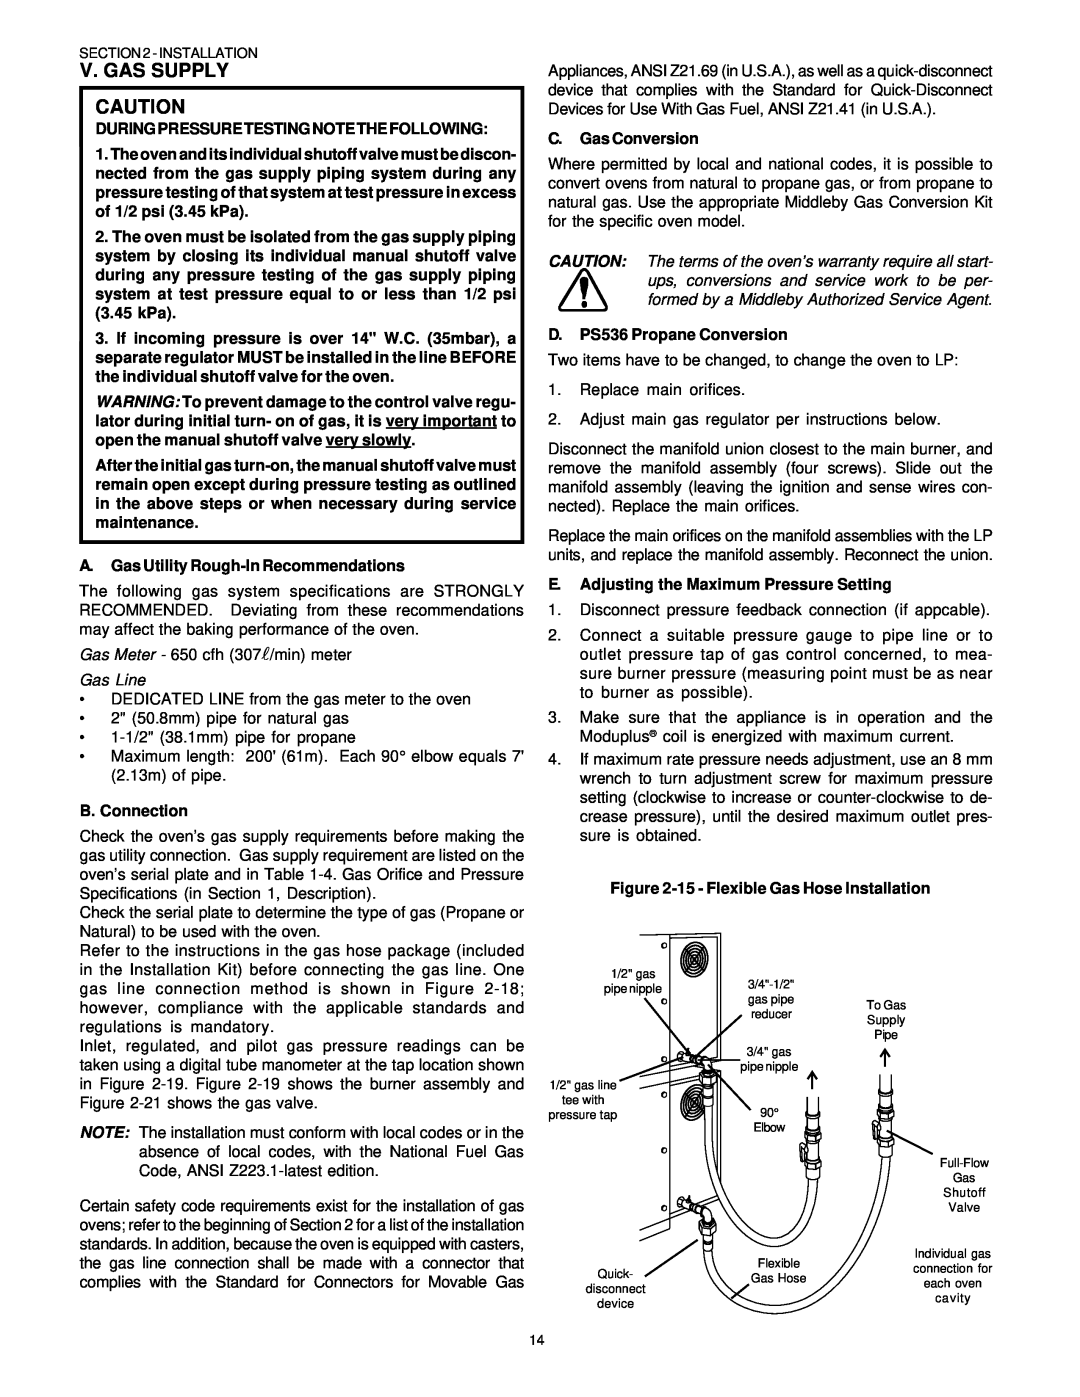 Middleby Marshall PS536GS English, Duringpressuretestingnotethefollowing, A.Gas Utility Rough-InRecommendations, Gas Line 